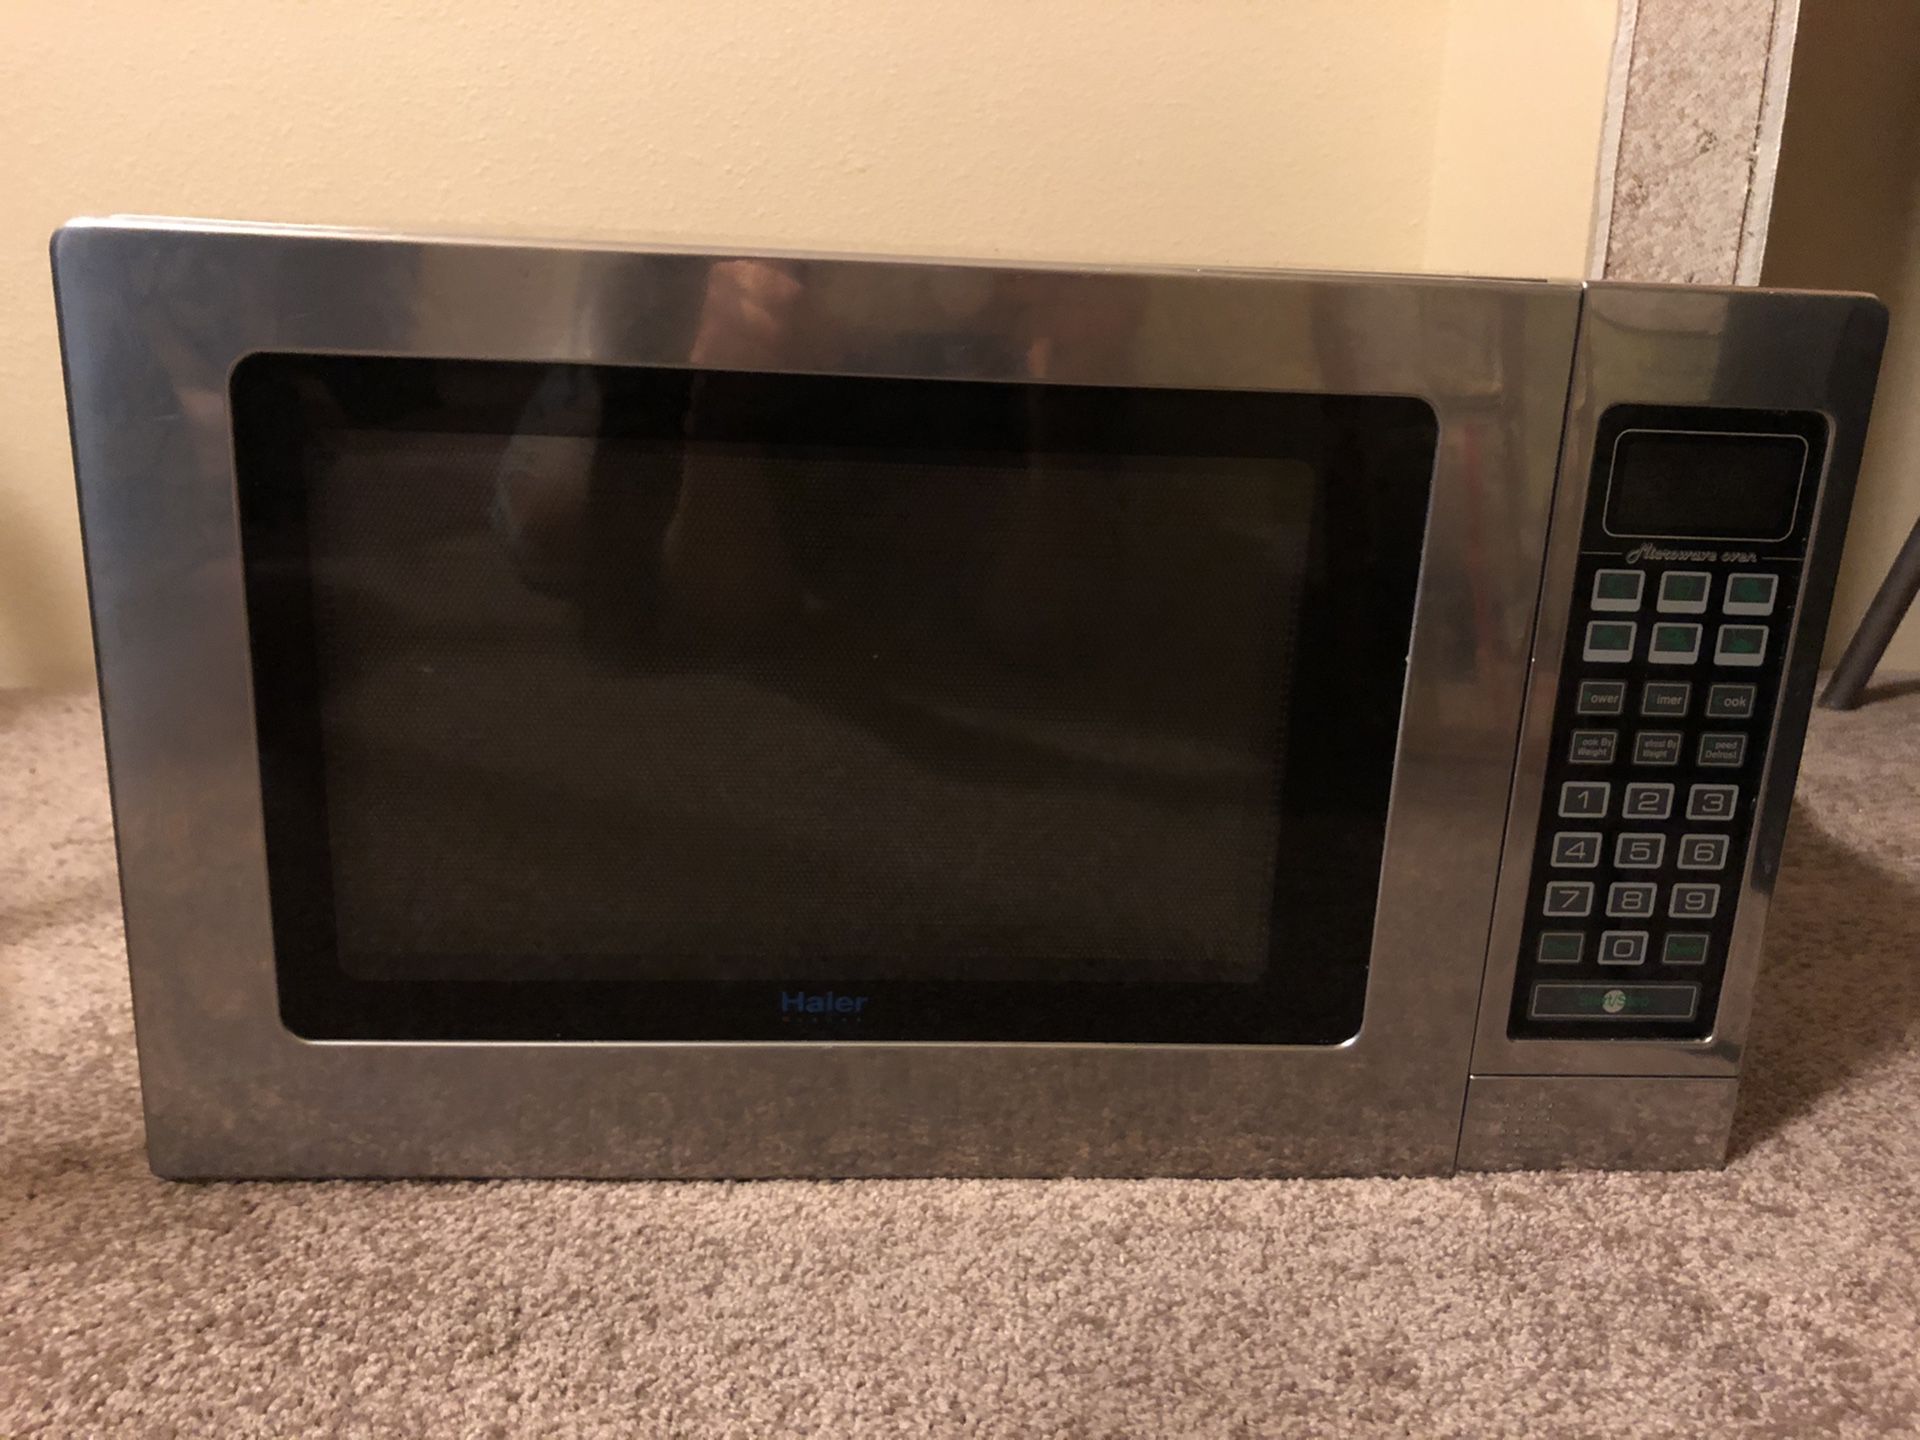 Stainless Steal Microwave